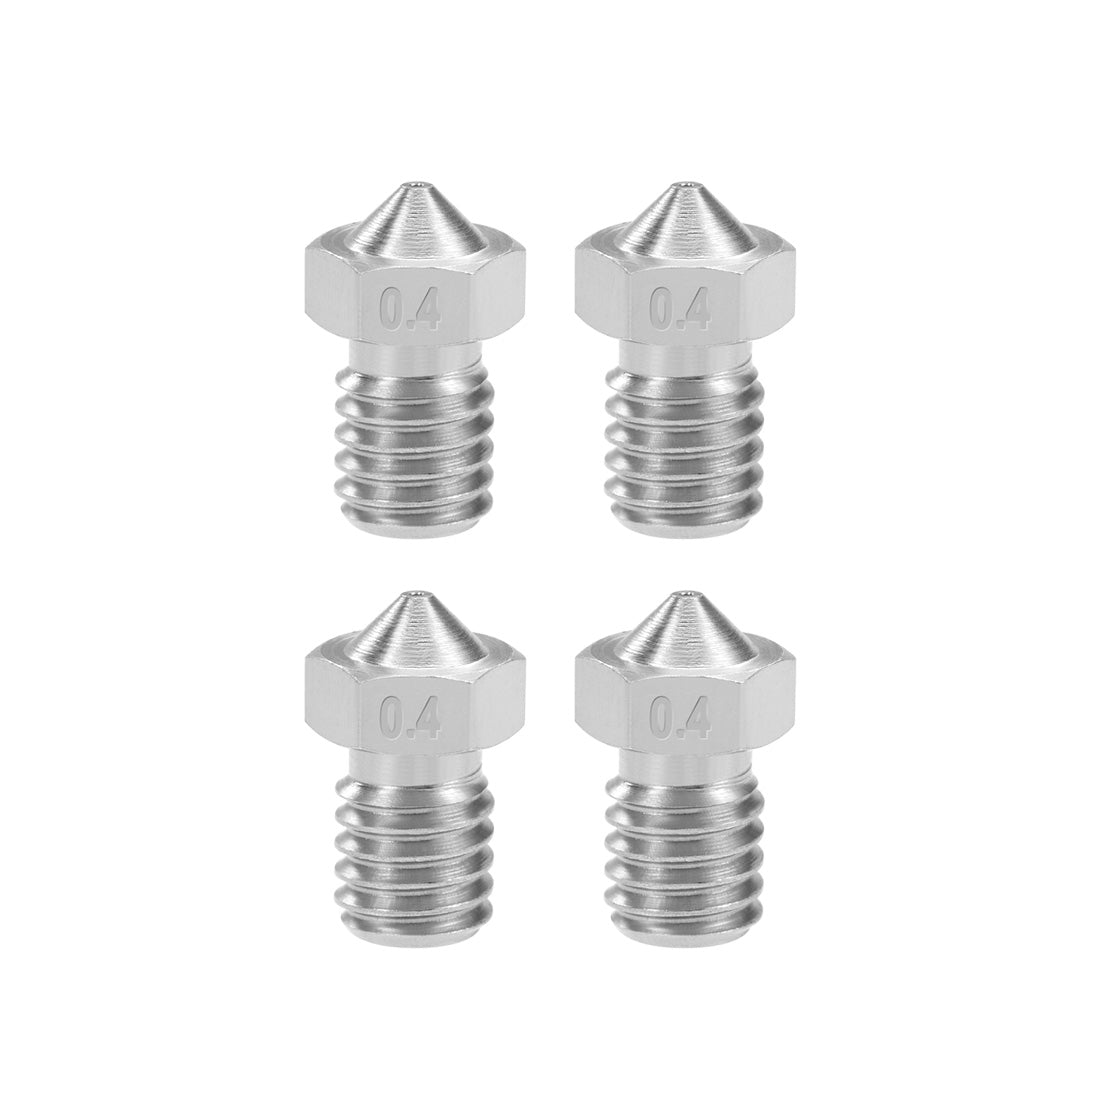 uxcell Uxcell 0.4mm 3D Printer Nozzle Head M6 Thread Replacement for V5 V6 1.75mm Extruder Print, Stainless Steel 4pcs